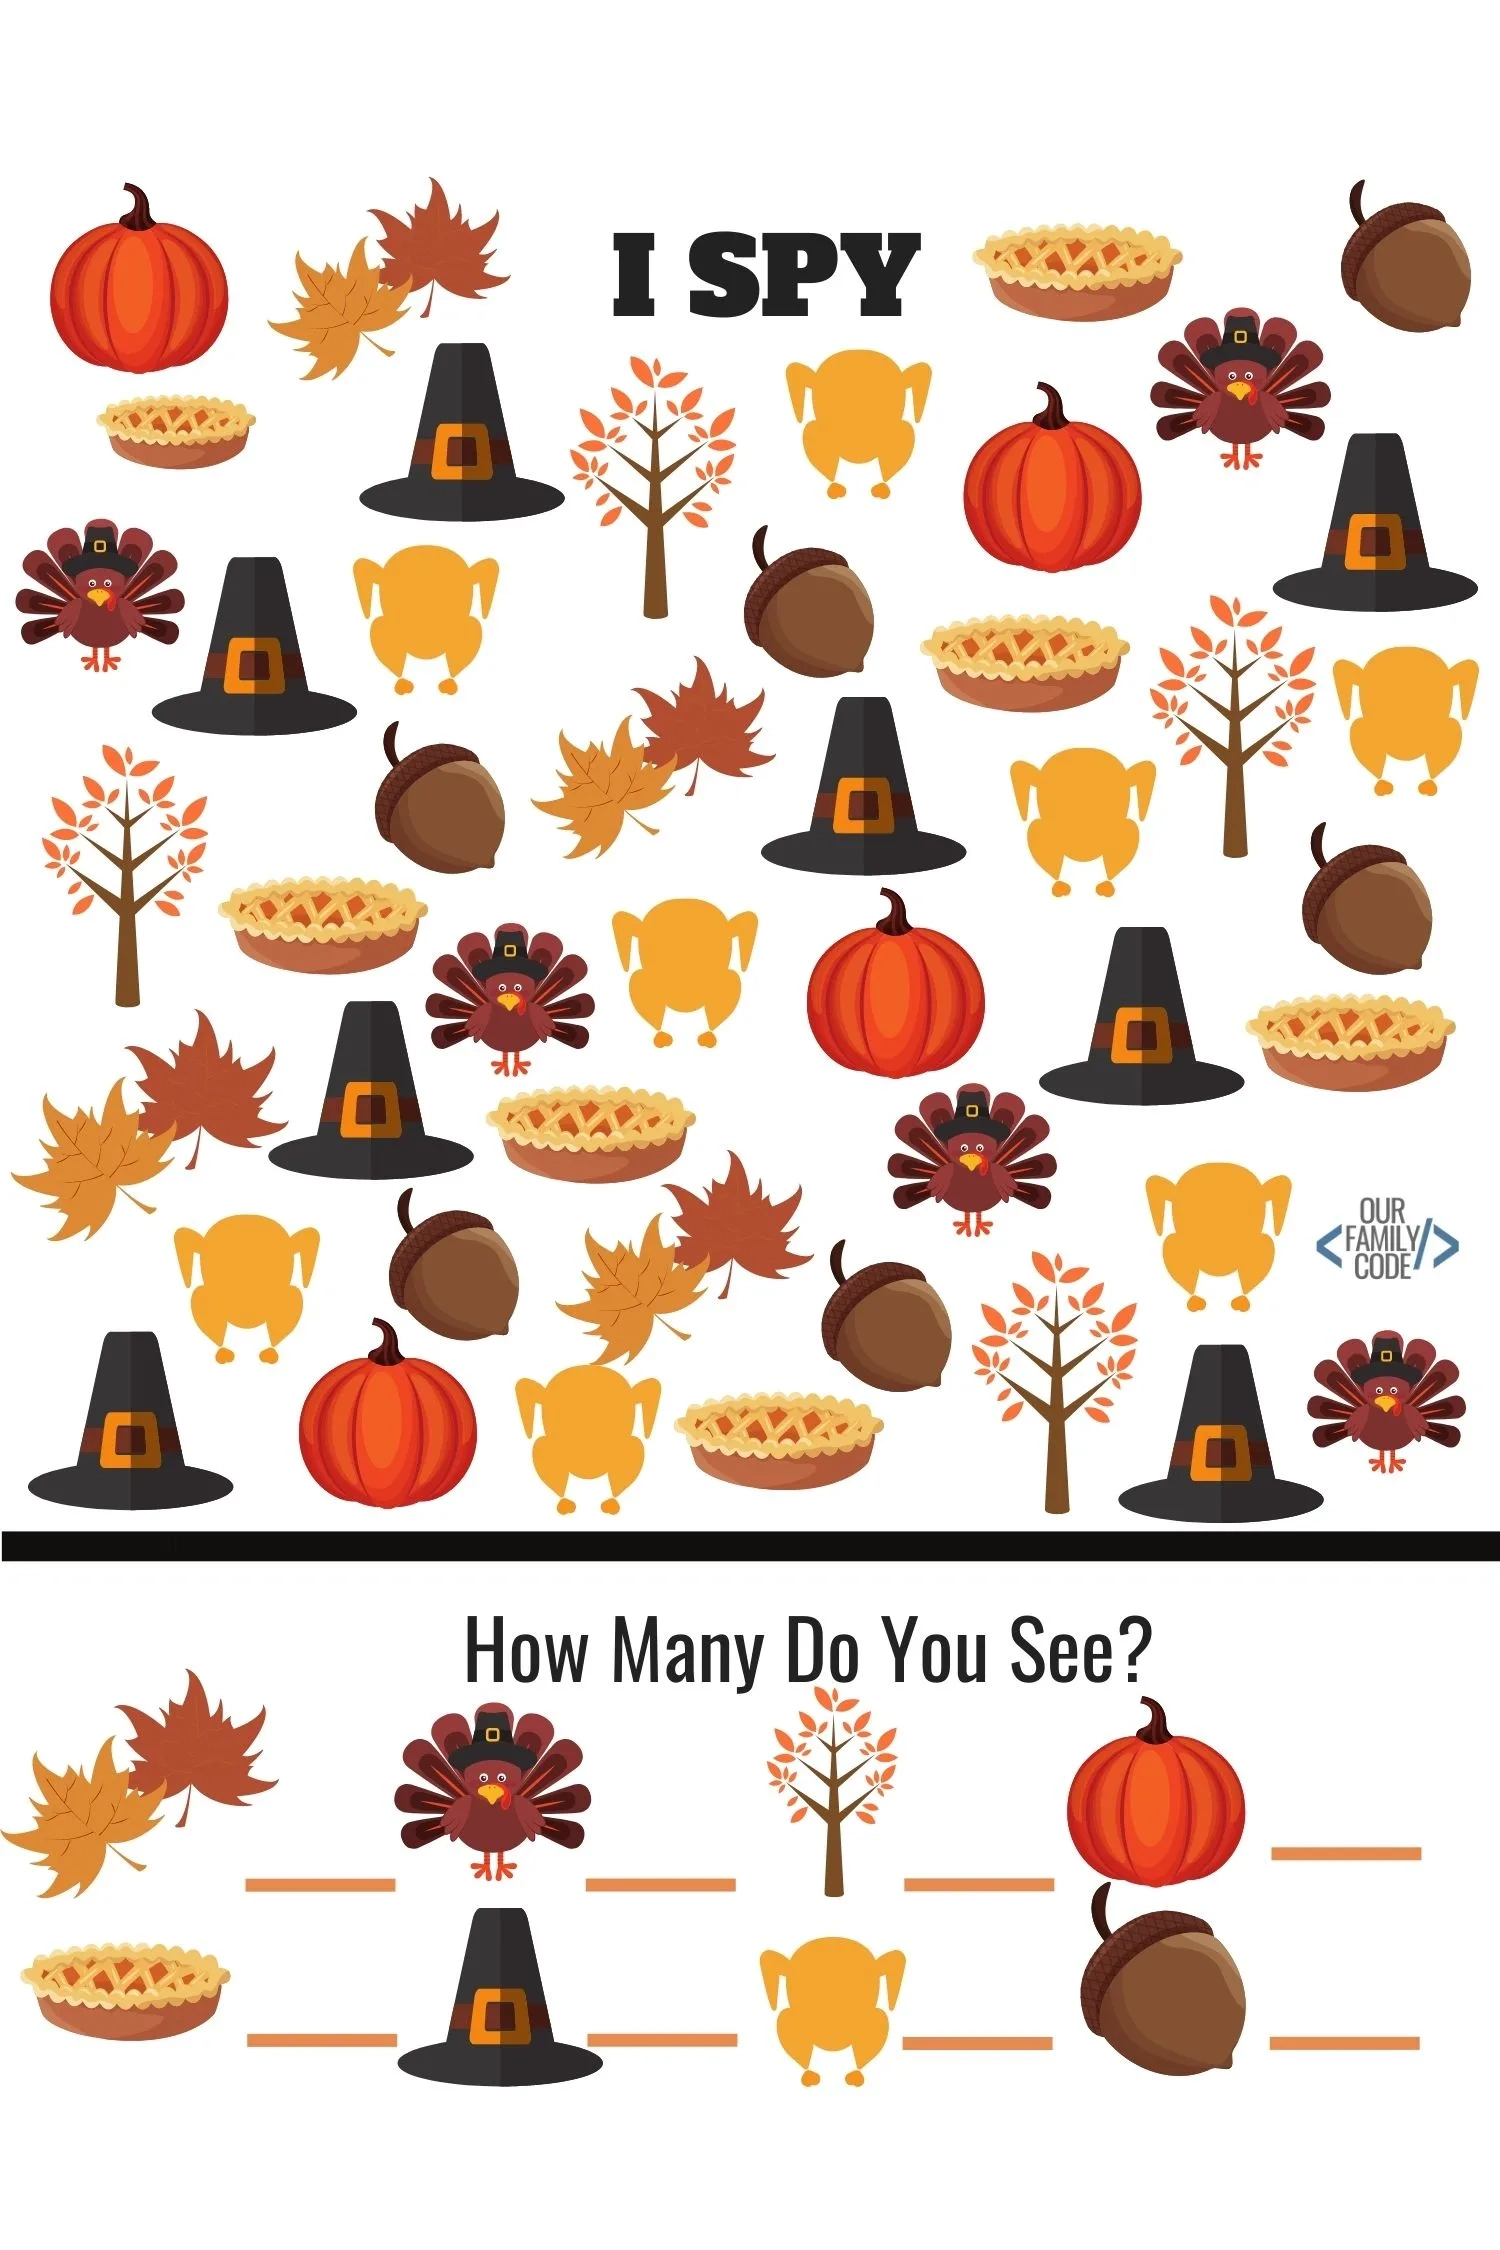 Free Thanksgiving Activity Worksheets For Kids - Our Family Code pertaining to Free Printable Kindergarten Thanksgiving Activities